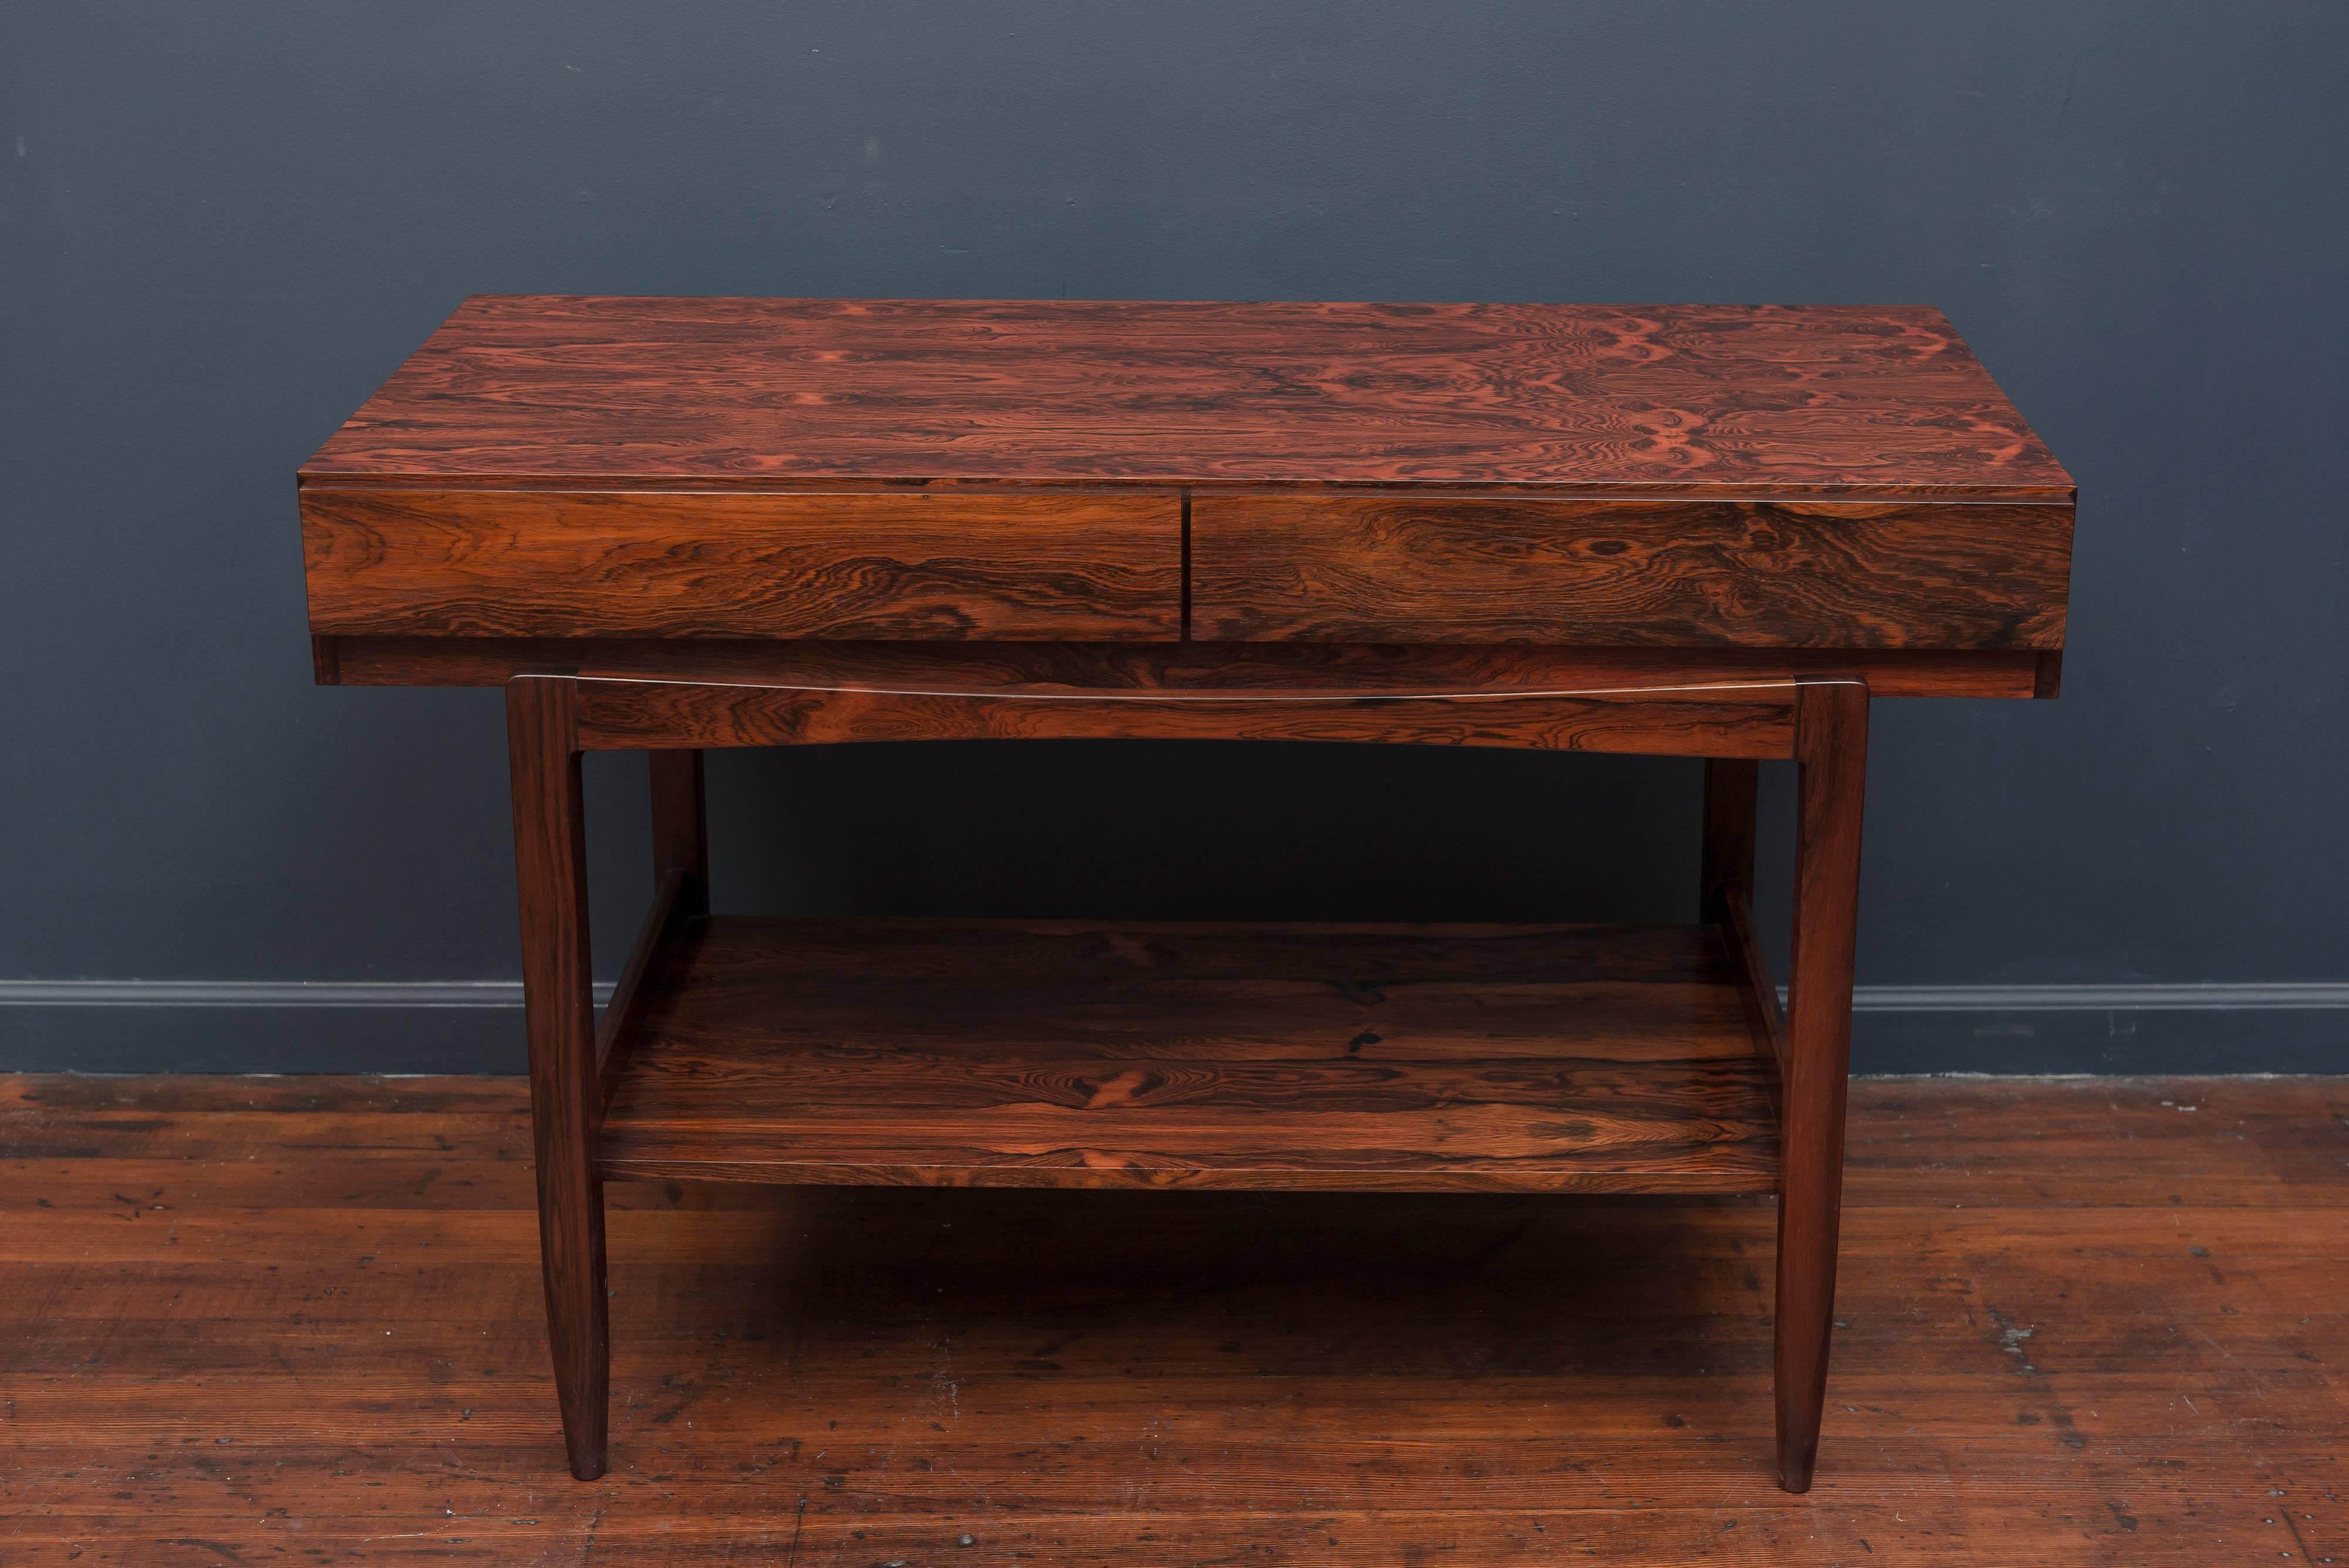 Danish rosewood console or server designed by Ib Kofod-Larsen for Faarup Møbelfabrik. Excellent original condition, labelled.